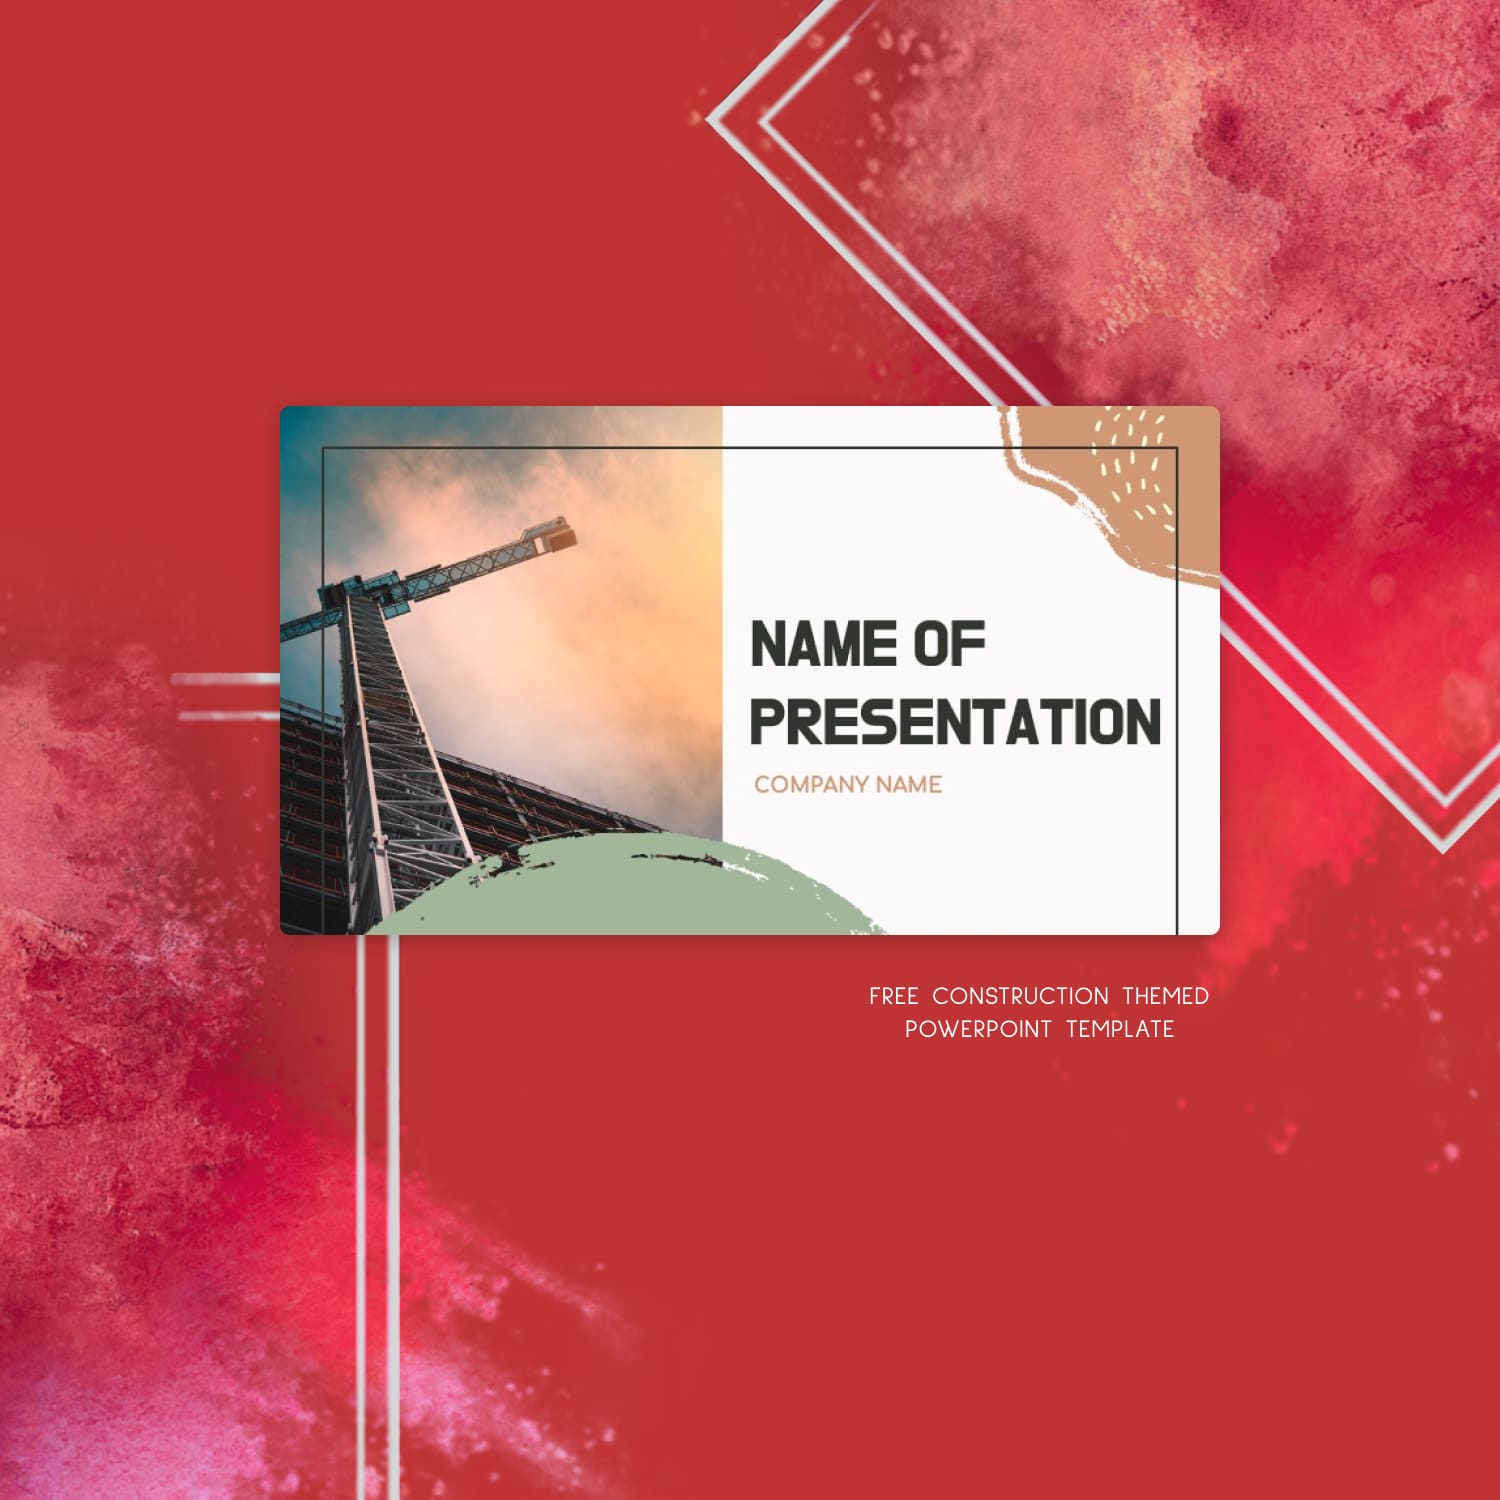 Free Construction Themed Powerpoint Template 1500 1.